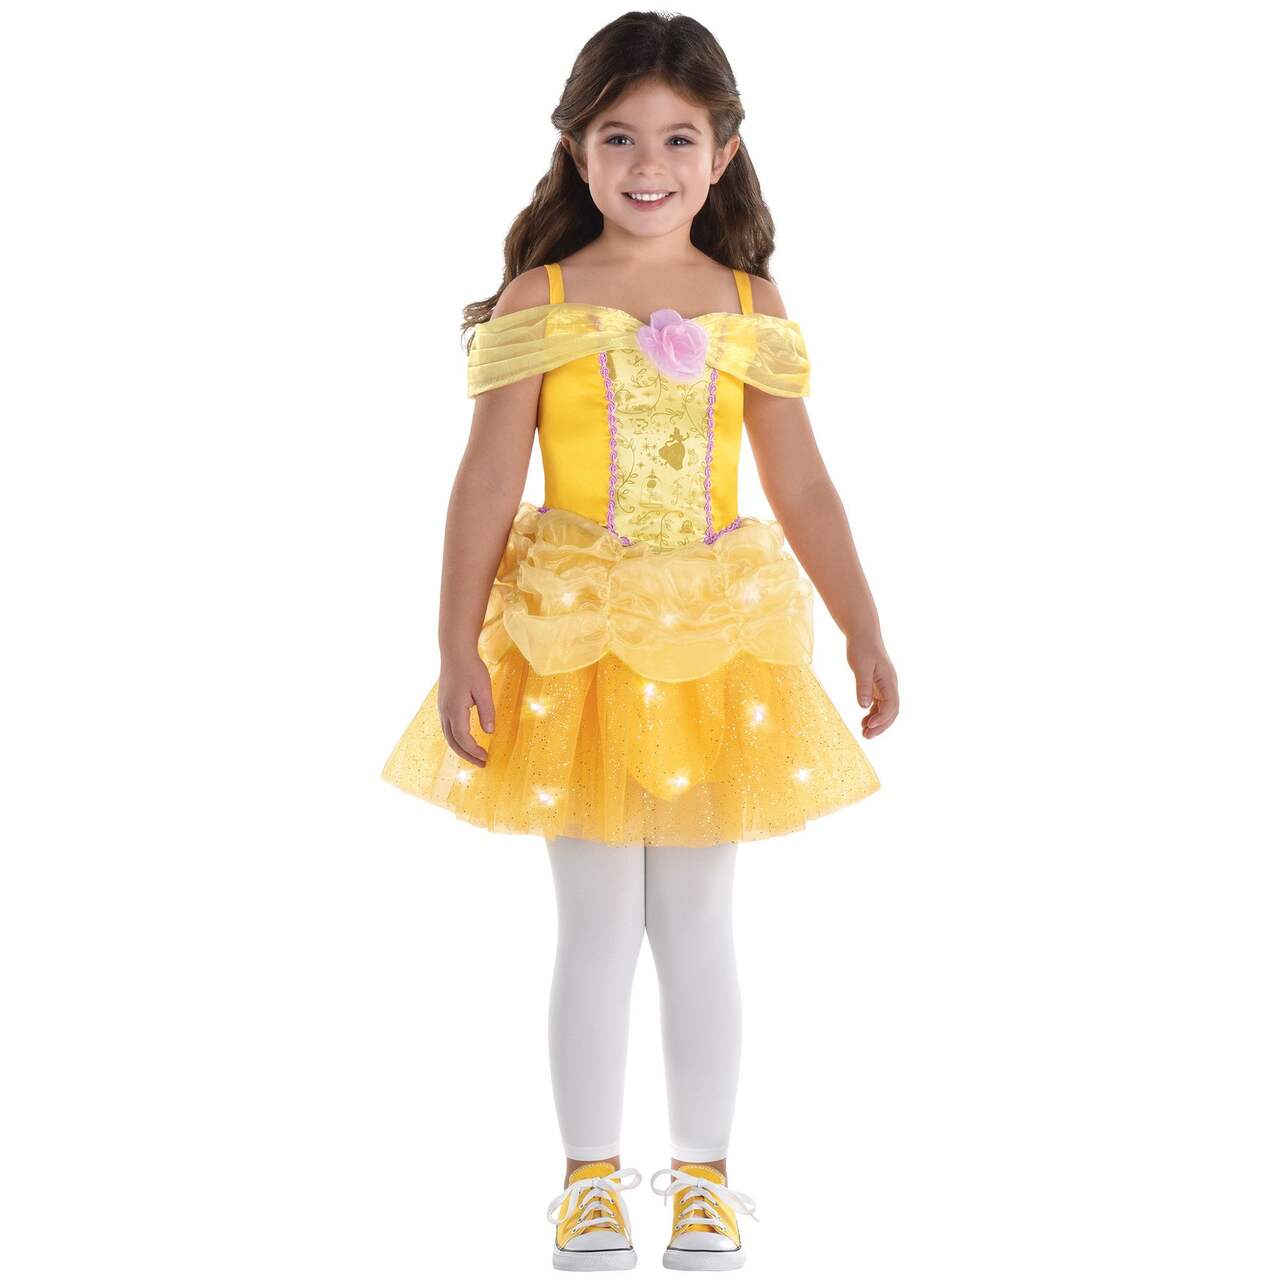 https://media-www.canadiantire.ca/product/seasonal-gardening/party-city-seasonal/party-city-halloween-and-fall-decor/8550812/belle-light-up-girl-costume-toddler-3-4-2c5e1248-3a6c-460d-99e6-c270c4194511-jpgrendition.jpg?imdensity=1&imwidth=640&impolicy=mZoom